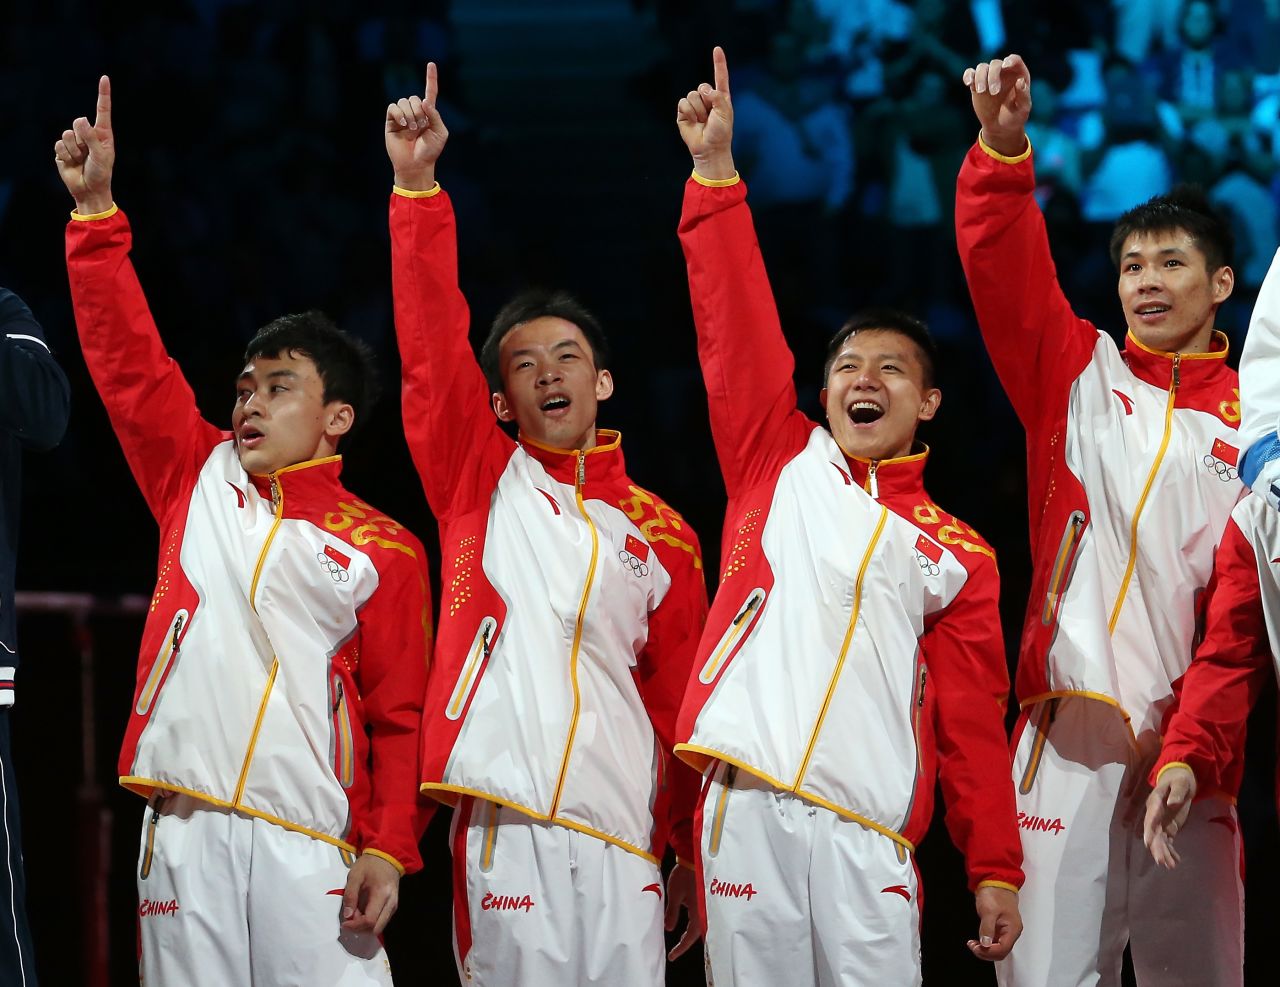 Gold medalists Zhe Feng, Weiyang Guo, Yibing Chen, Chenglong Zhang and Kai Zou of China celebrate on the podium during the medal ceremony in the artistic gymnastics men's team final.